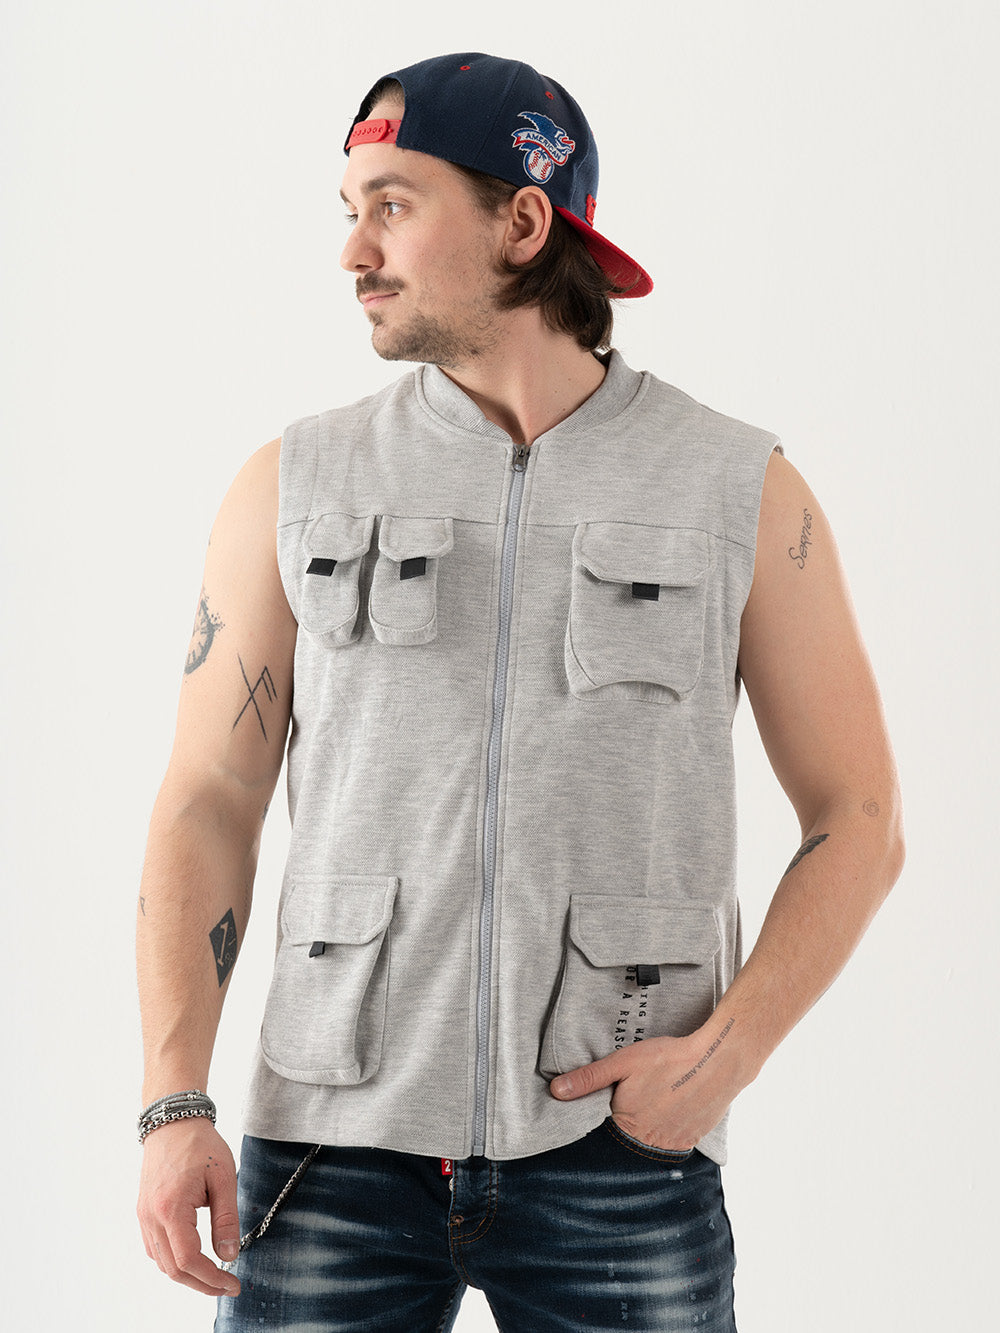 A man wearing a FREESPIRIT VEST with multi-pocket cargo pockets and a hat.